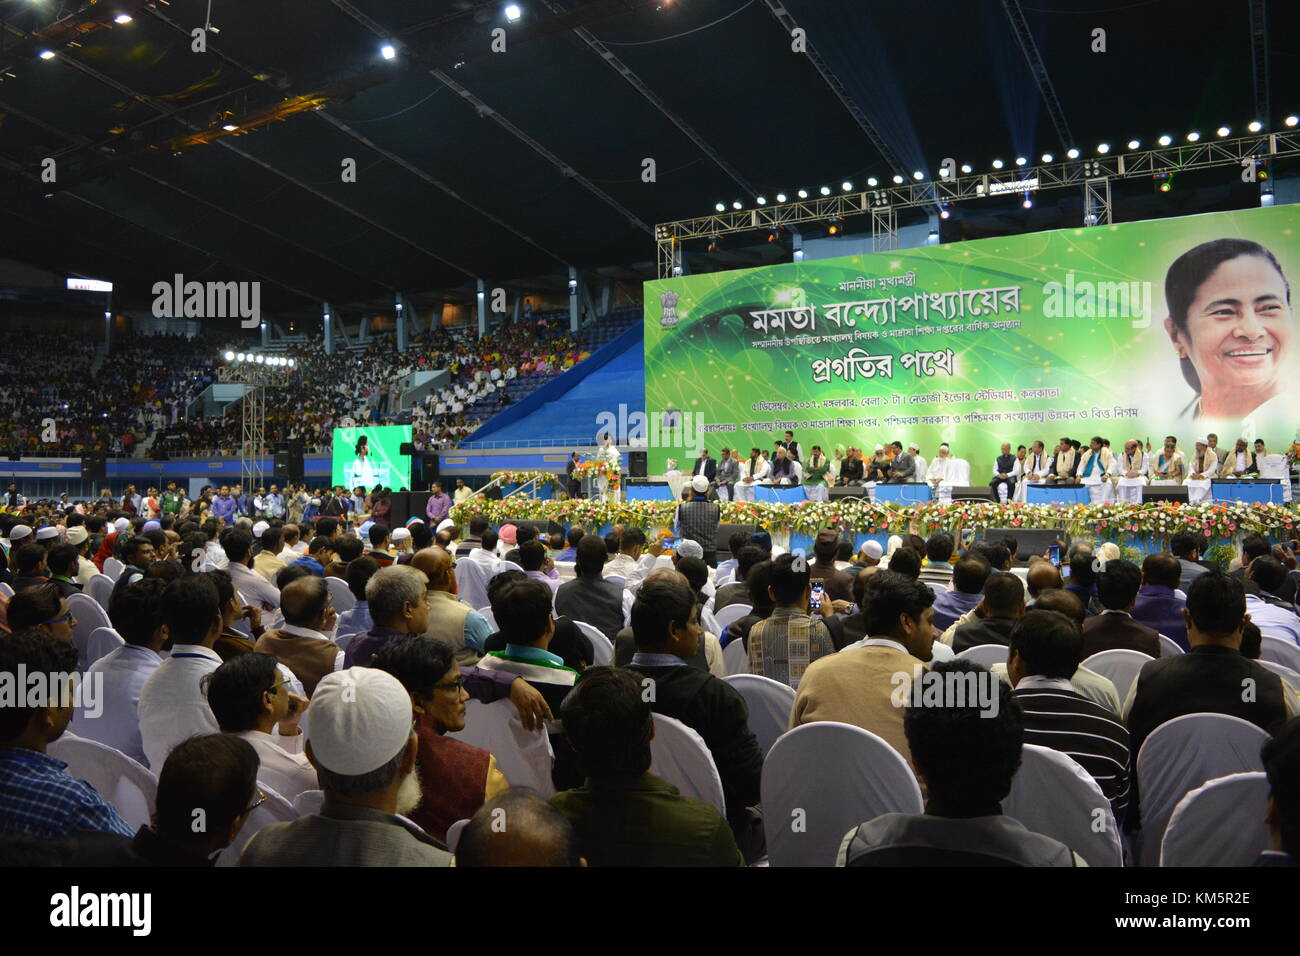 Kolkata, India, 5th December 2017. Unknown Muslim participants attend the annual function organised by The Minority Affairs and Madrasah Education Department, West Bengal and West Bengal Minorities Development & Finance Corporation at Netaji Indoor Stadium, Kolkata. Smt. Mamata Banerjee, Chief Minister of West Bengal addressed the gatherings. Credit: Rupa Ghosh/Alamy Live News. Stock Photo